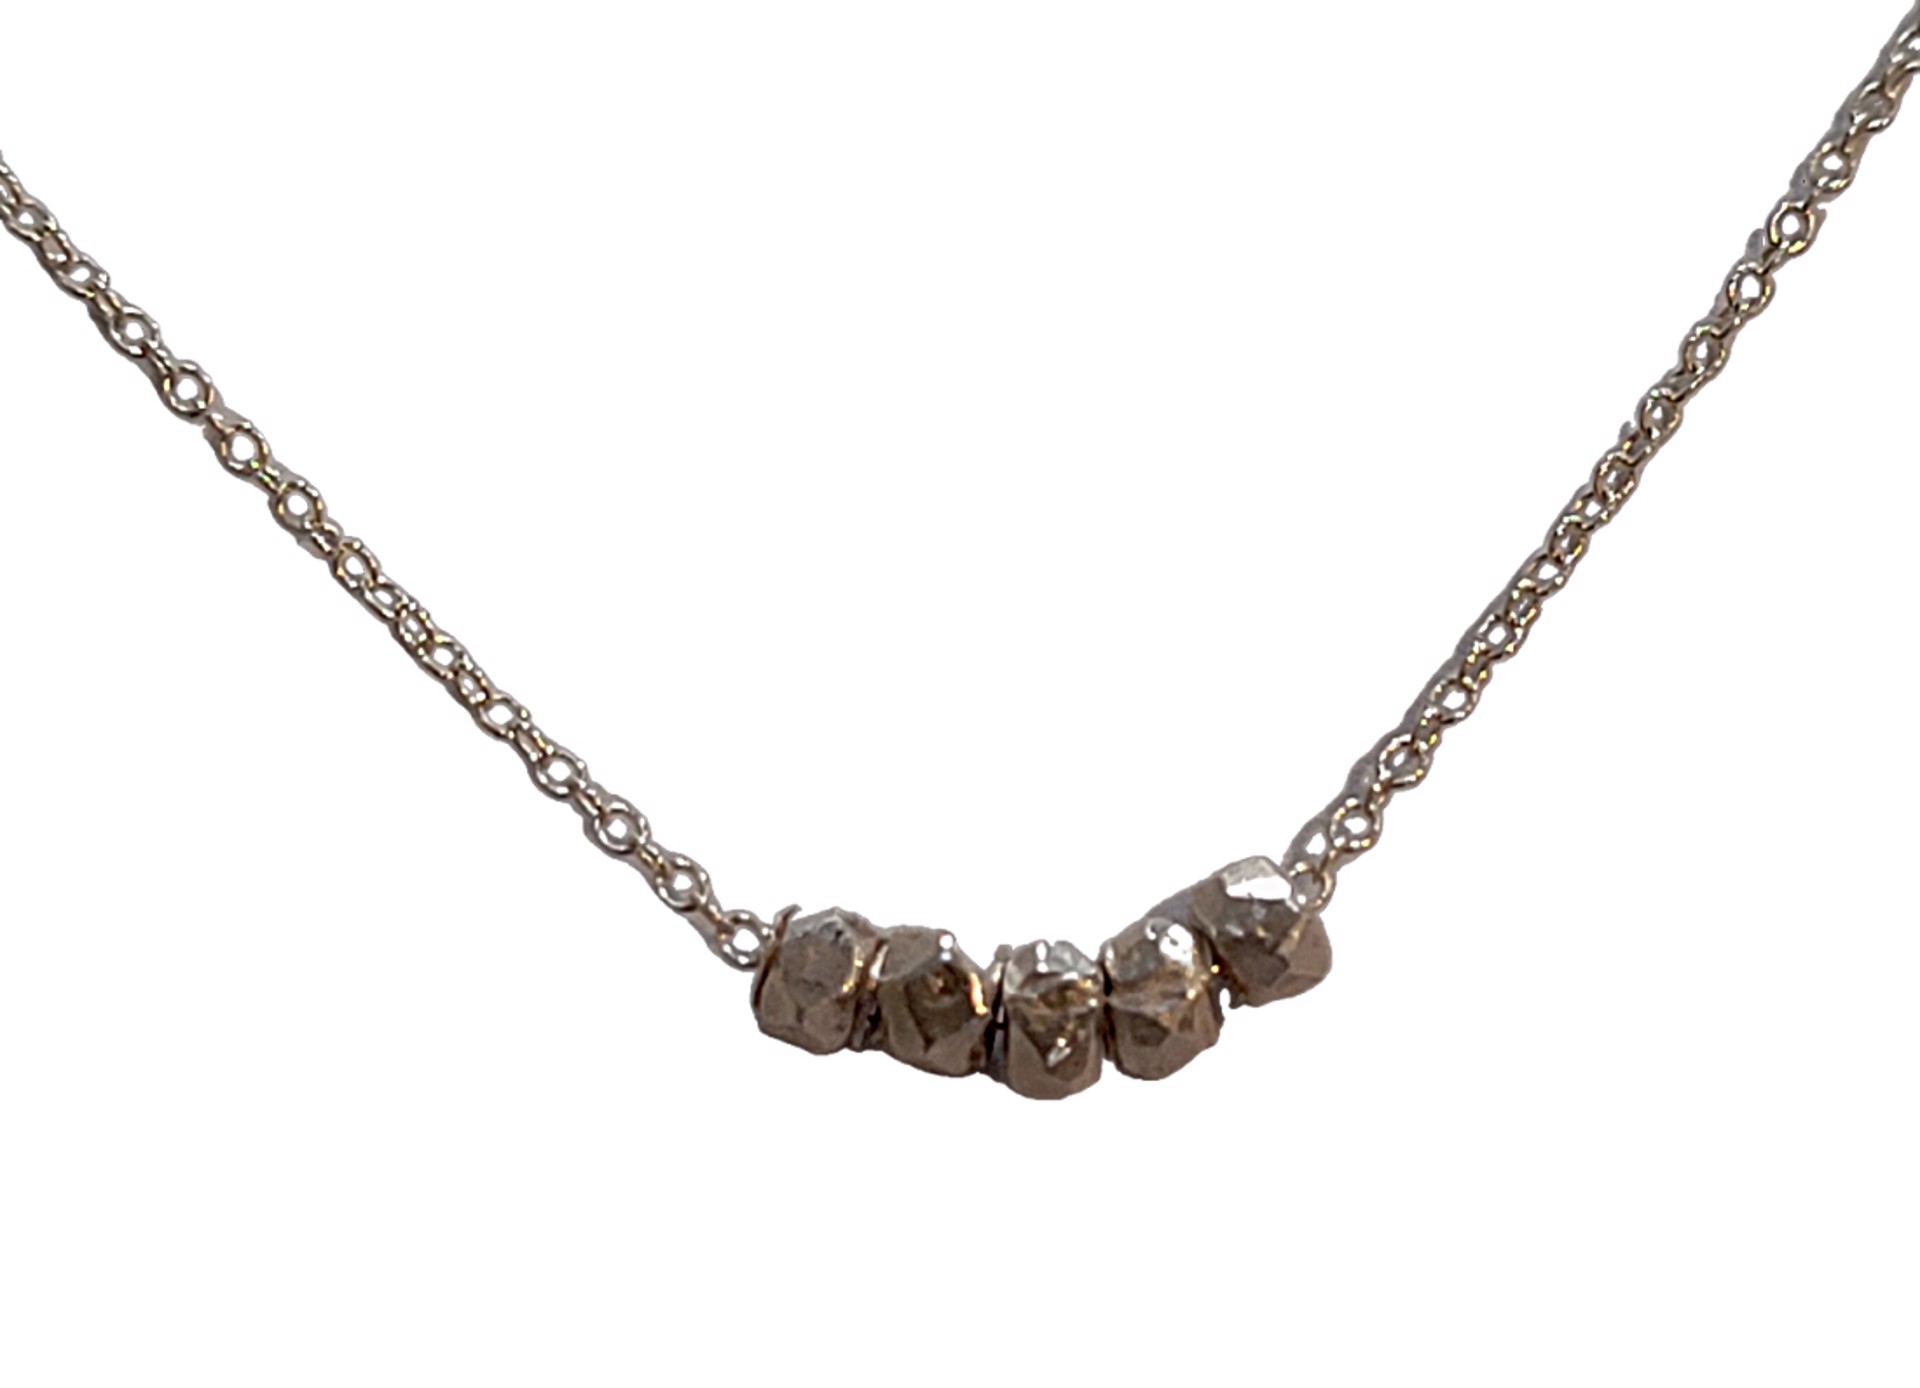 Necklace-Sterling Silver Faceted  Beads by Julia Balestracci